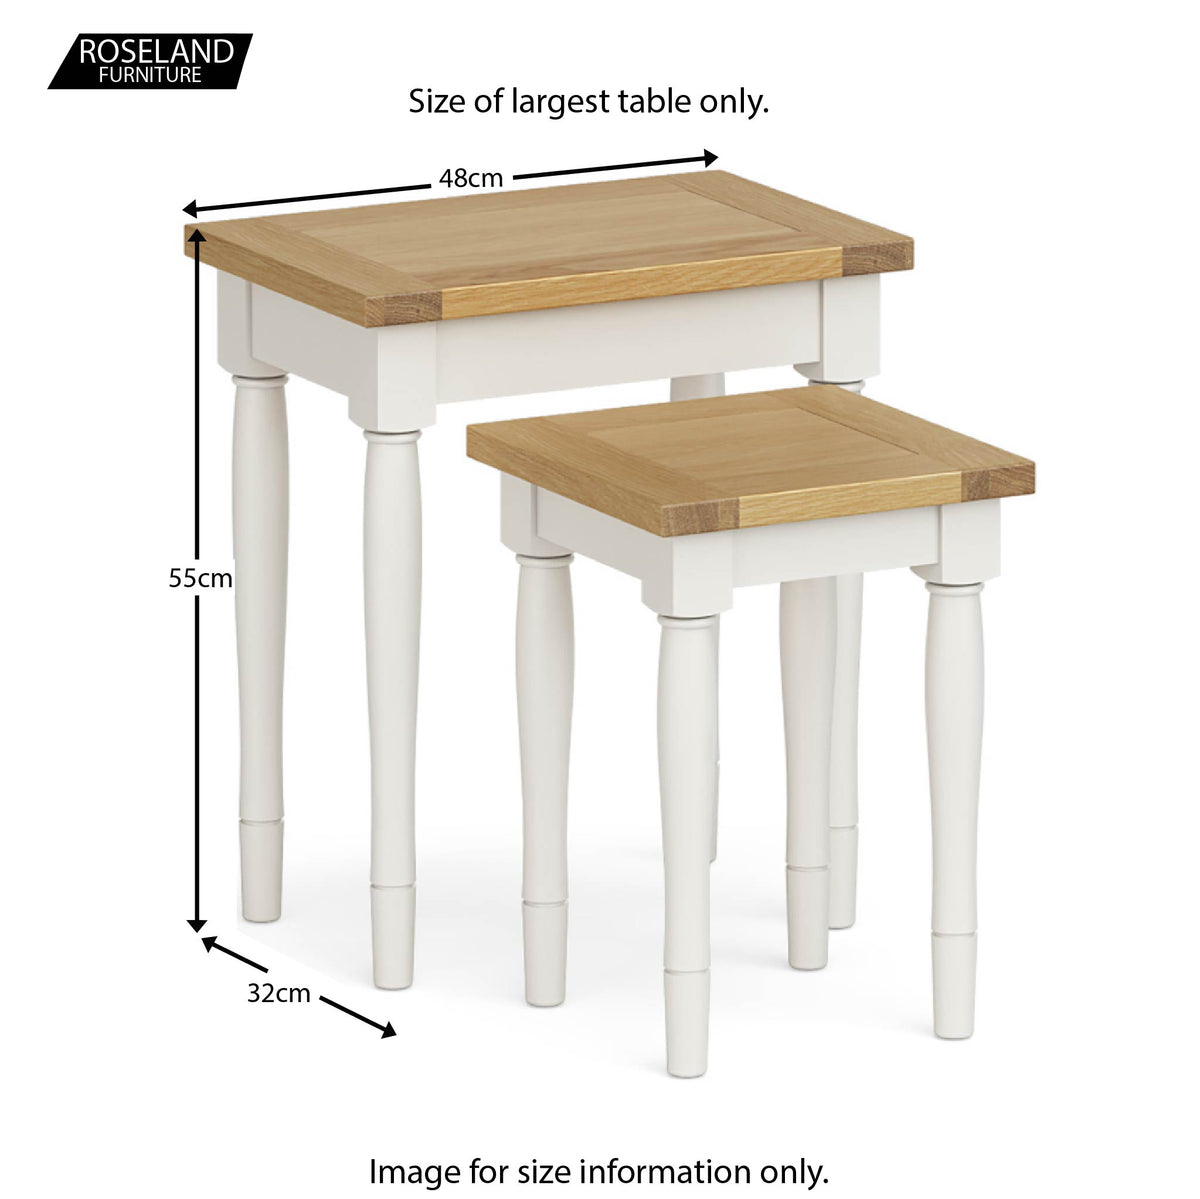 Chichester Ivory Nest of Tables - Size Guide